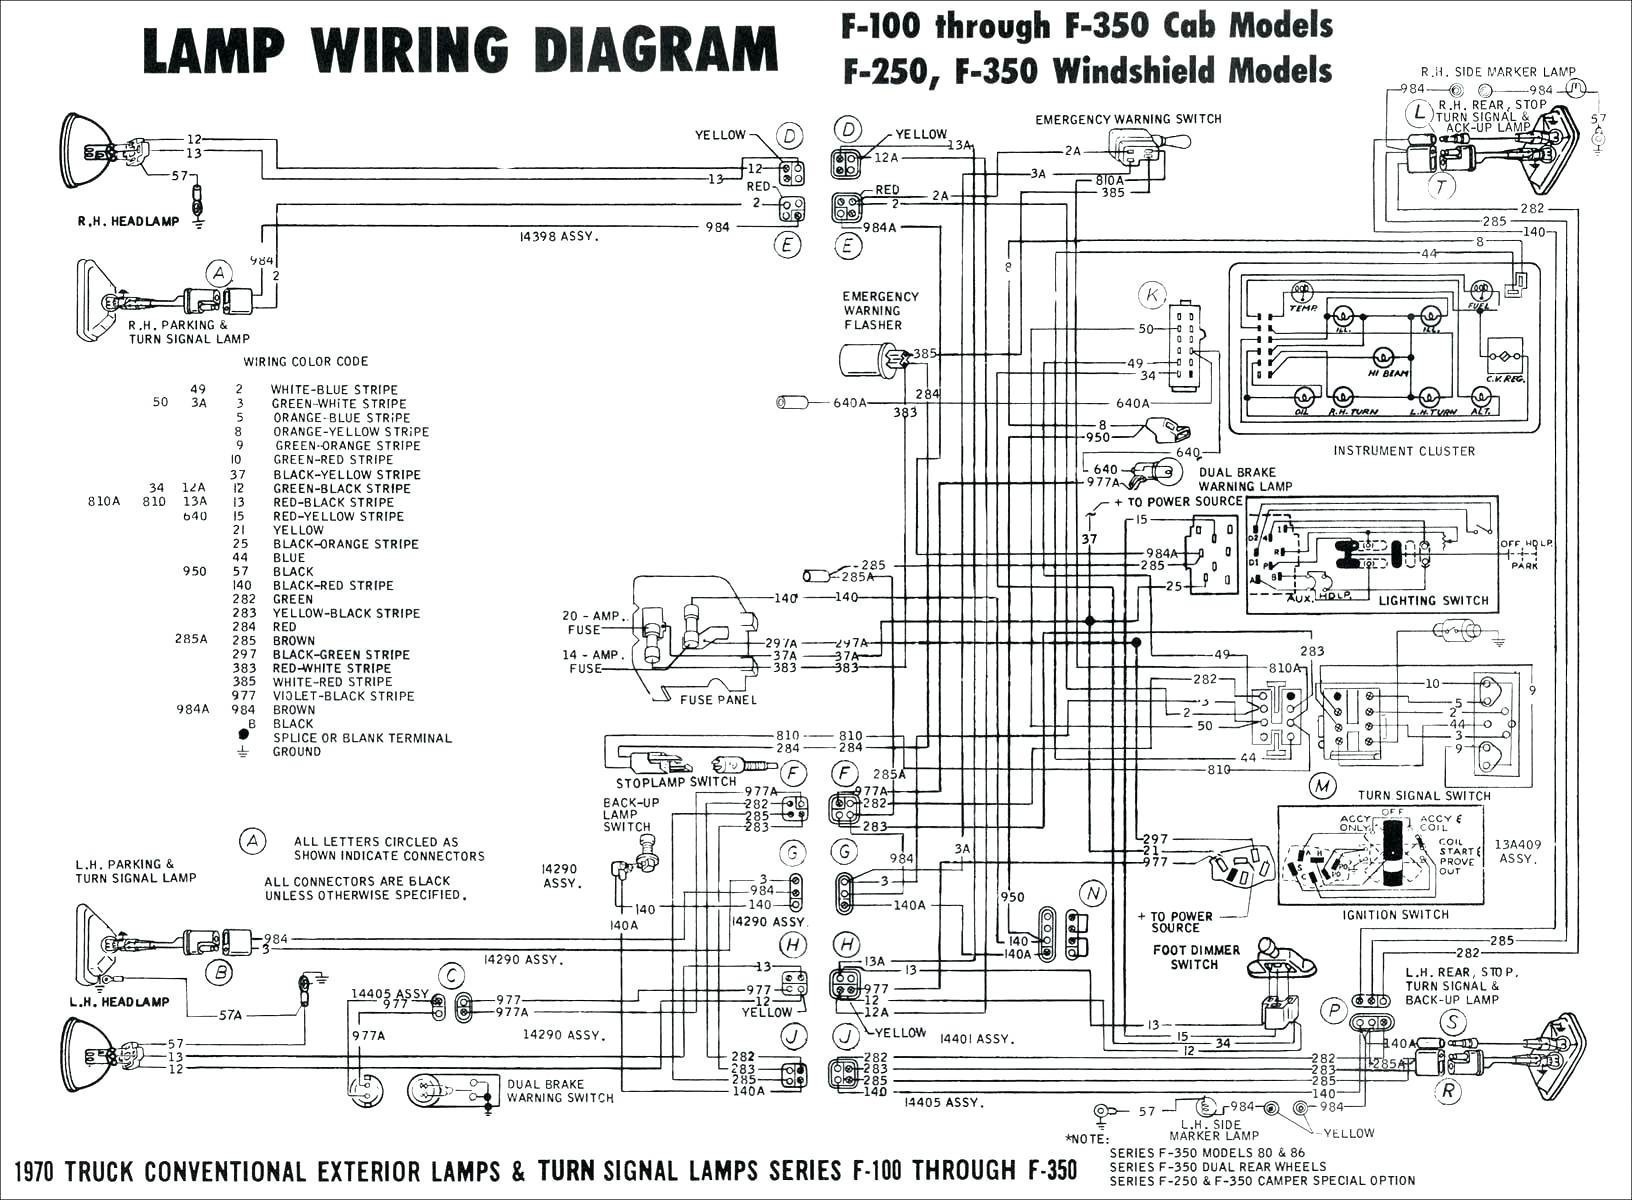 John Deere Ignition Switch Wiring Diagram 2018 Wiring Diagram Crutchfield Archives Joescablecar